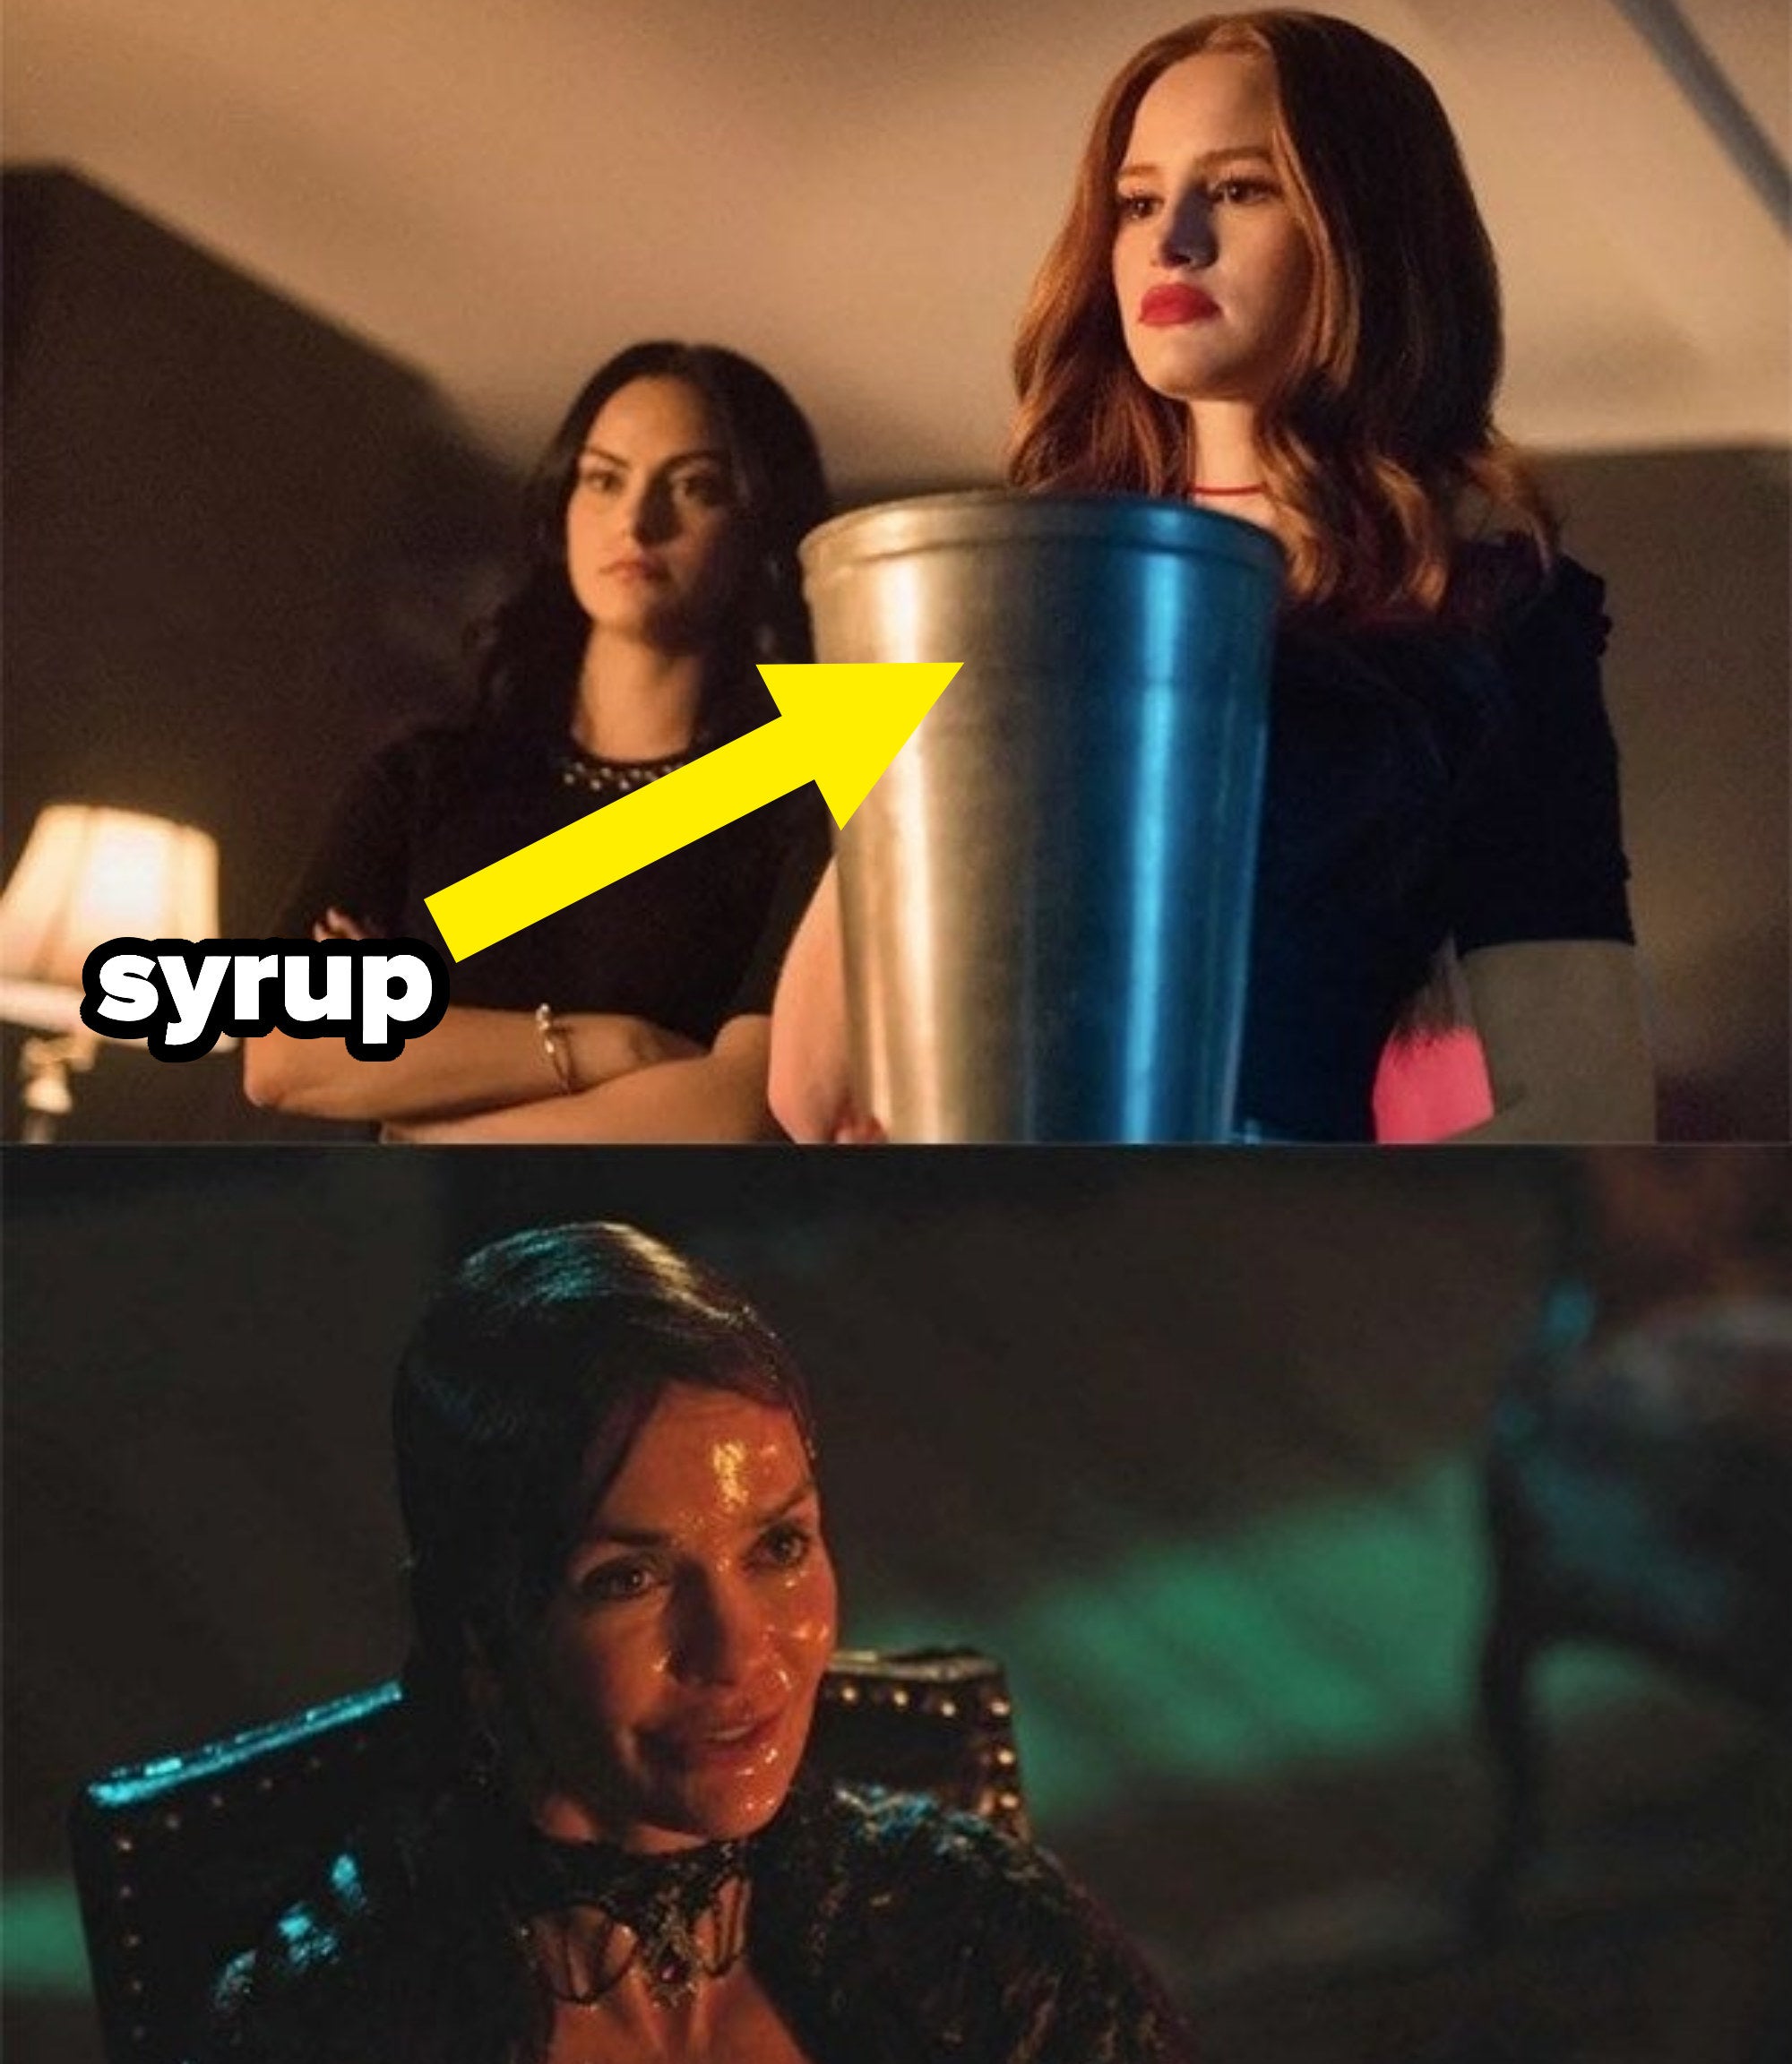 A bucket of syrup next to the girls and the mom covered in syrup